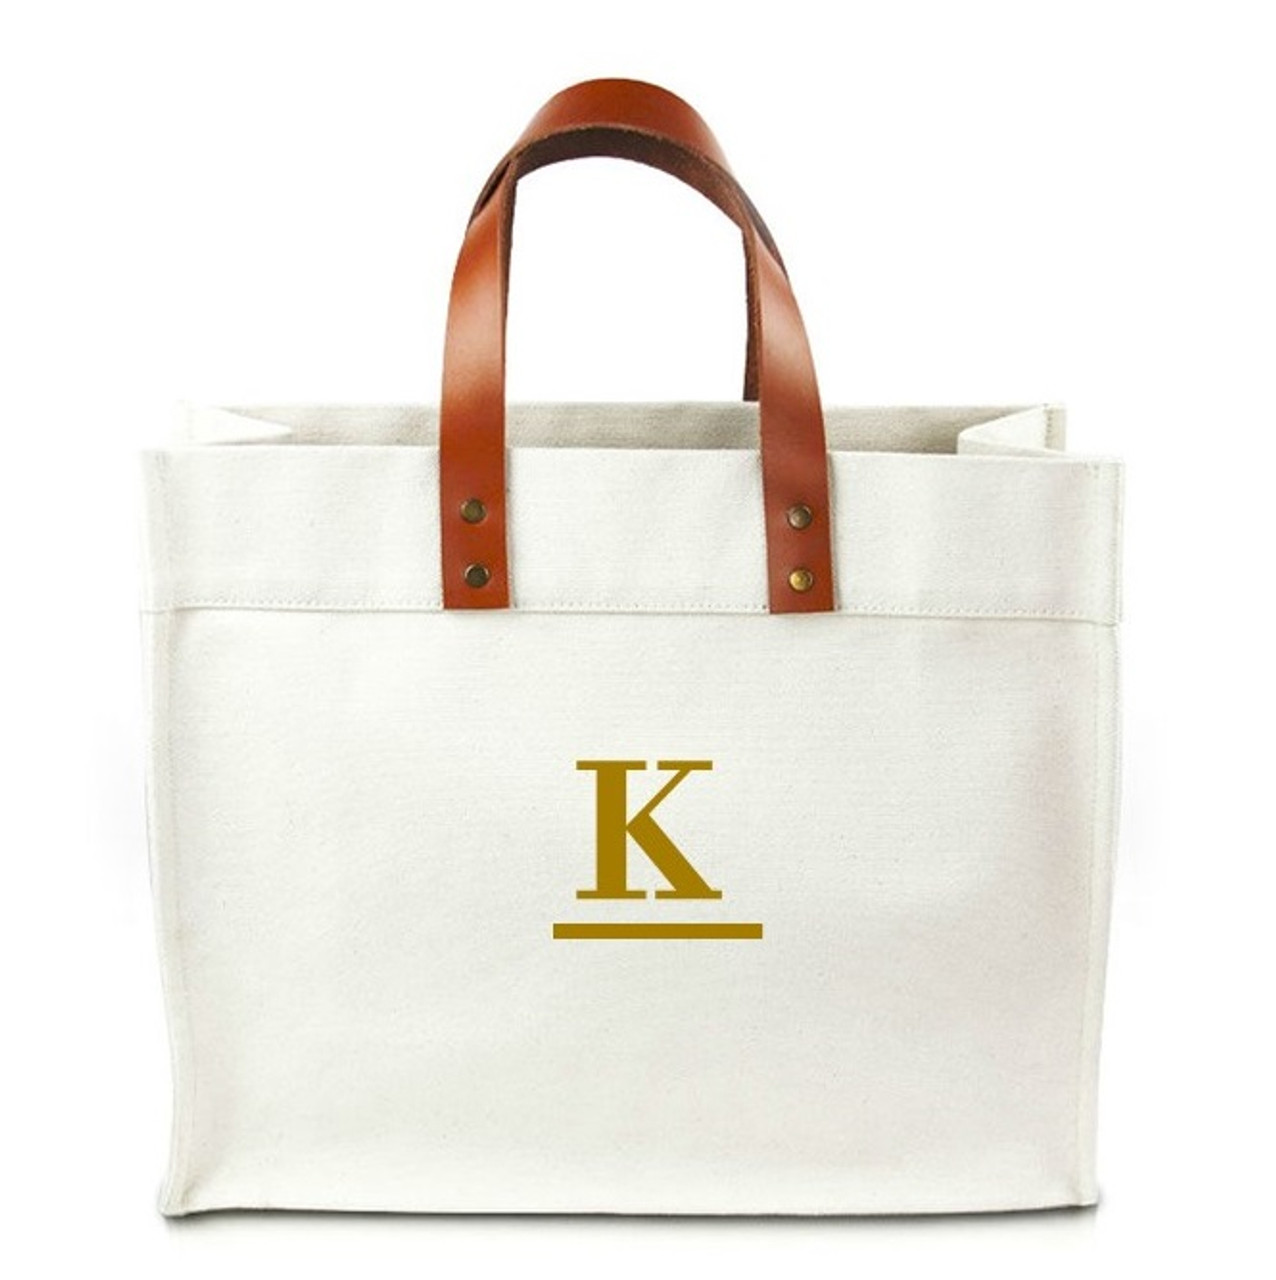 Fulham Single Center Initial Canvas Tote Bag w/ Leather Straps